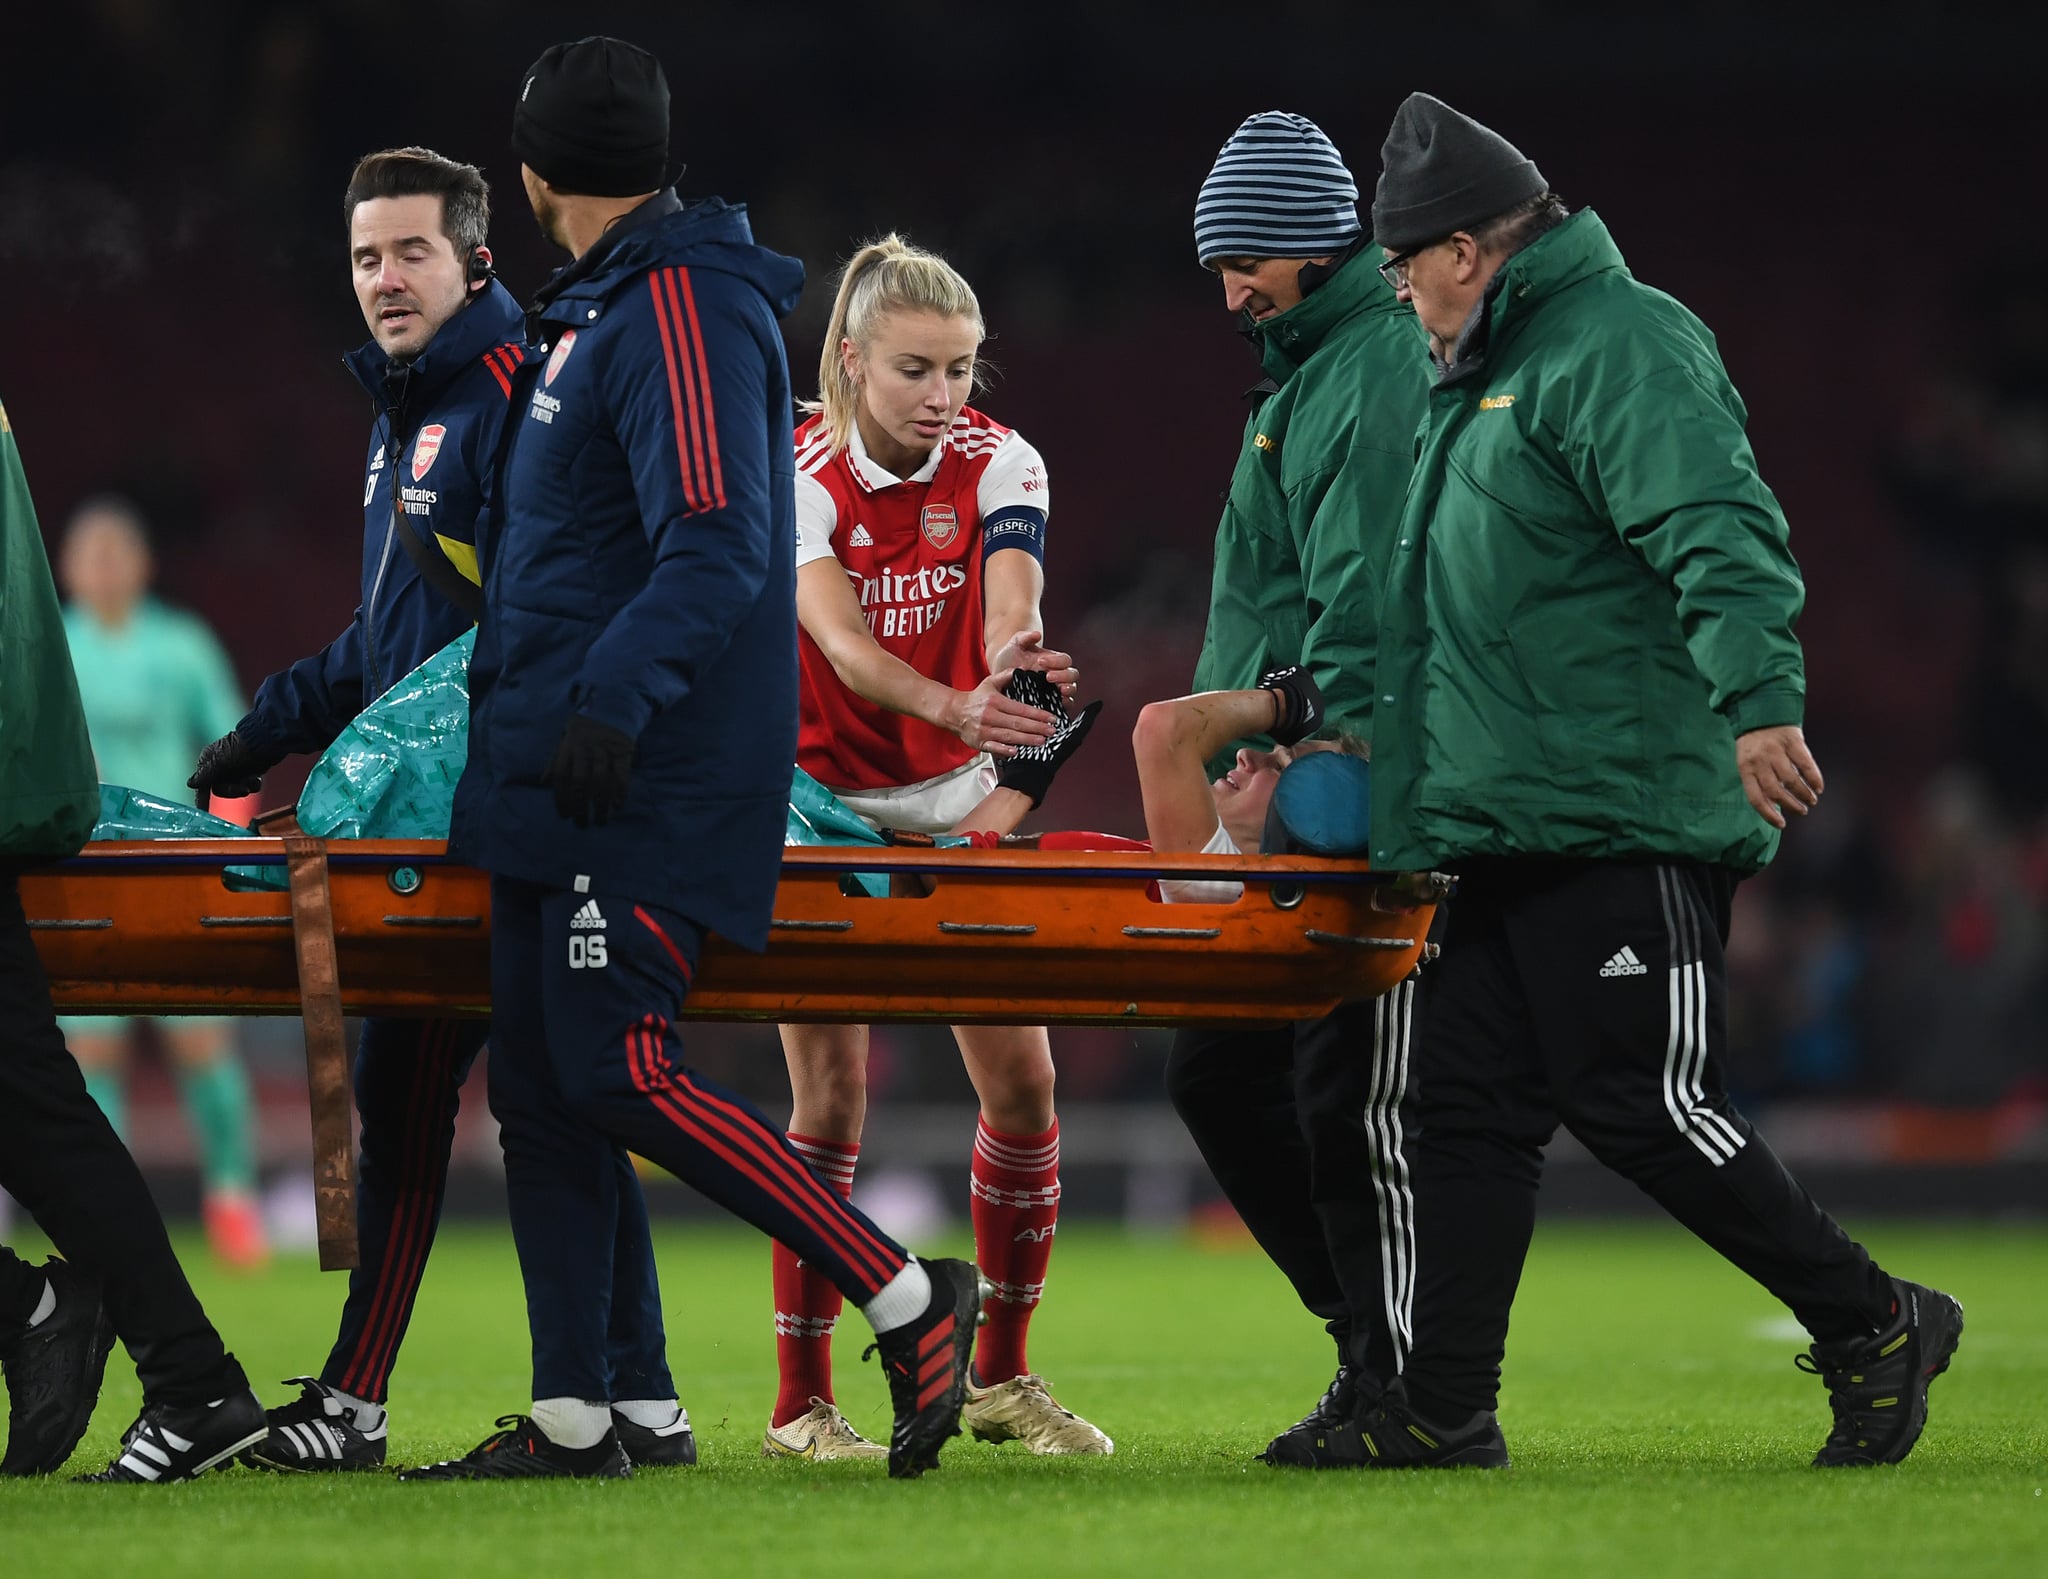 LONDON, ENGLAND - DECEMBER 15: Leah Williamson of Arsenal checks on her injured team mate Vivianne Miedemsa during the UEFA Women's Champions League group C match between Arsenal  and Olympique Lyon at Emirates Stadium on December 15, 2022 in London, England. (Photo by David Price/Arsenal FC via Getty Images)